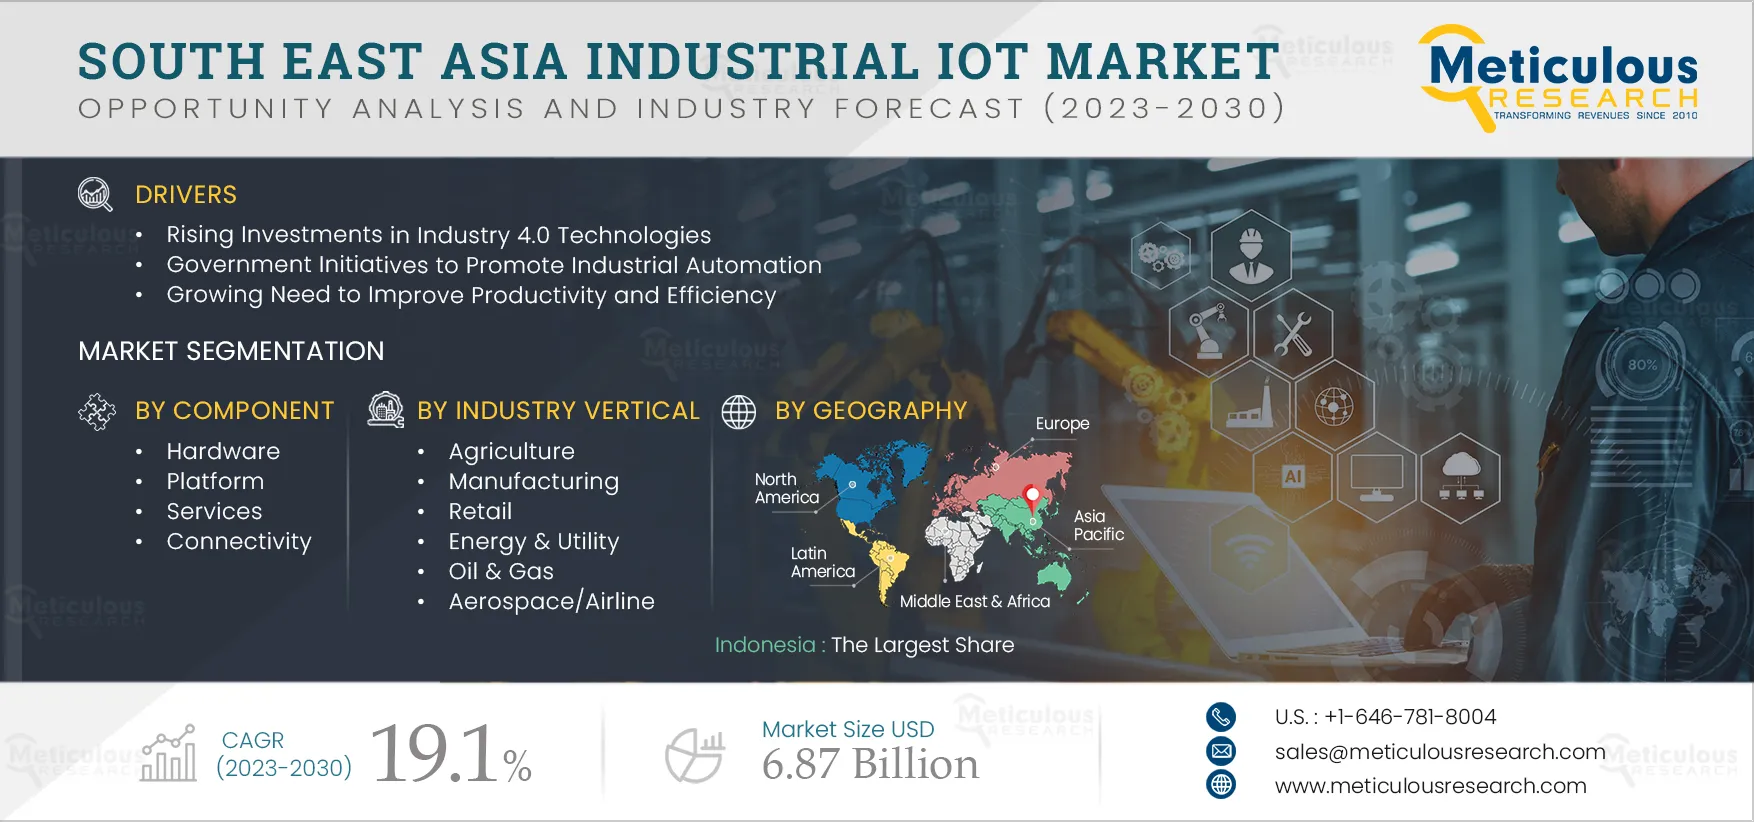 South East Asia Industrial IoT Market